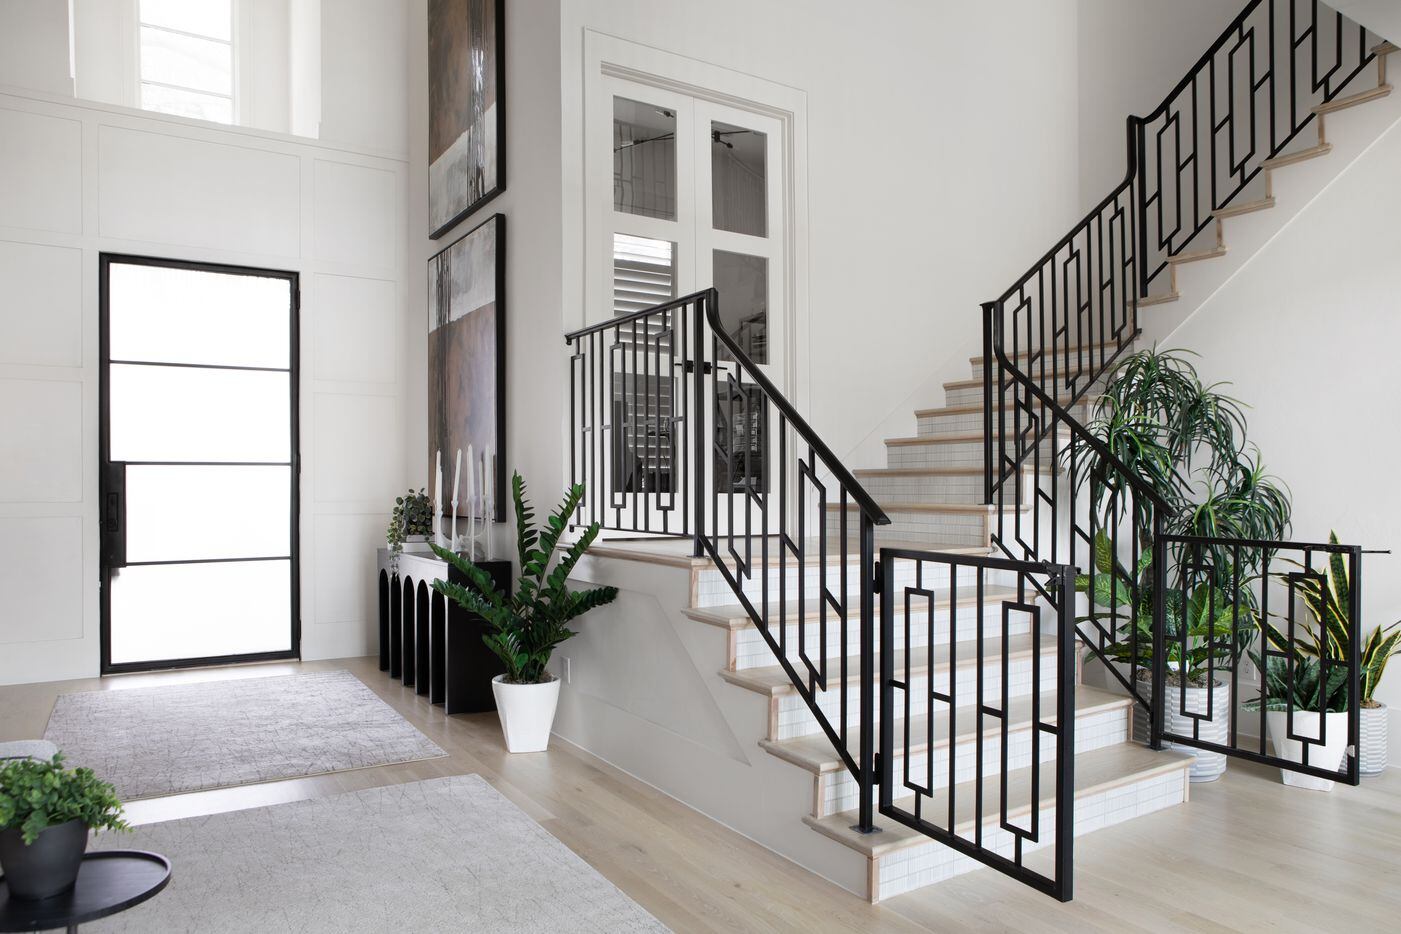 The geometric wrought-iron banister is surrounded by greenery. "The staircase was layered...